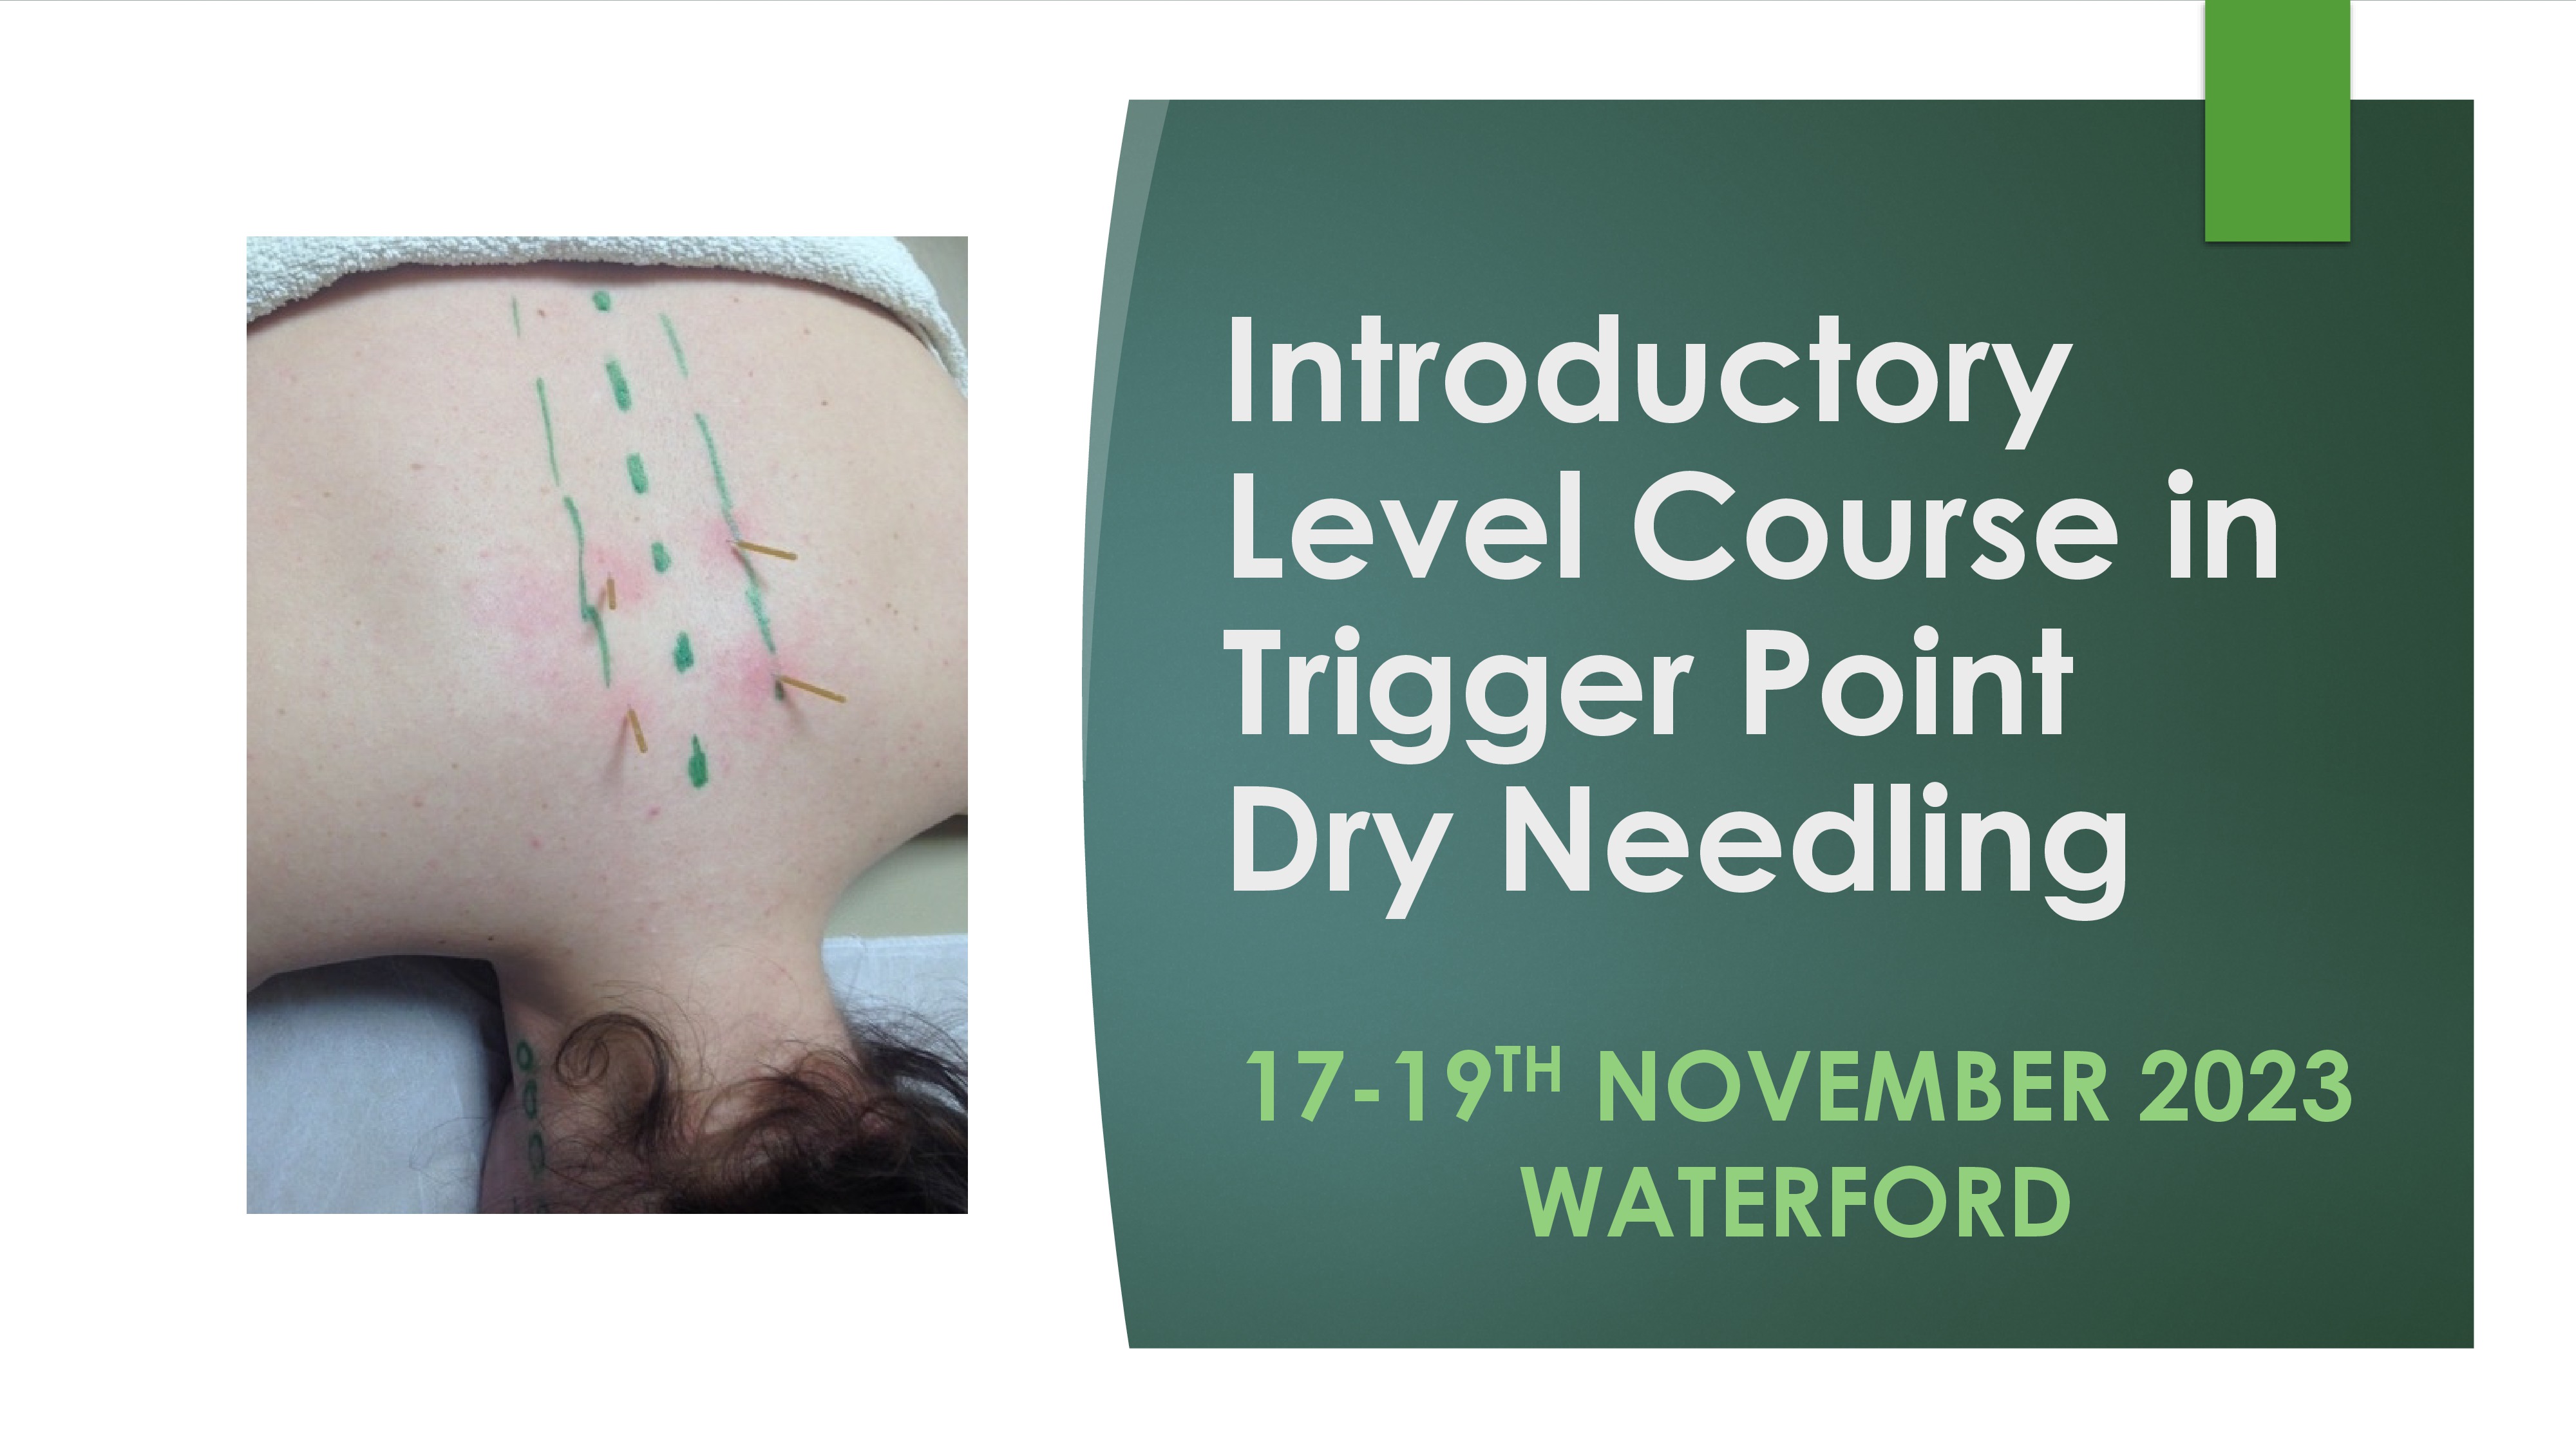 Introductory Level Trigger Point Dry Needling 17-19th November 2023, WATERFORD